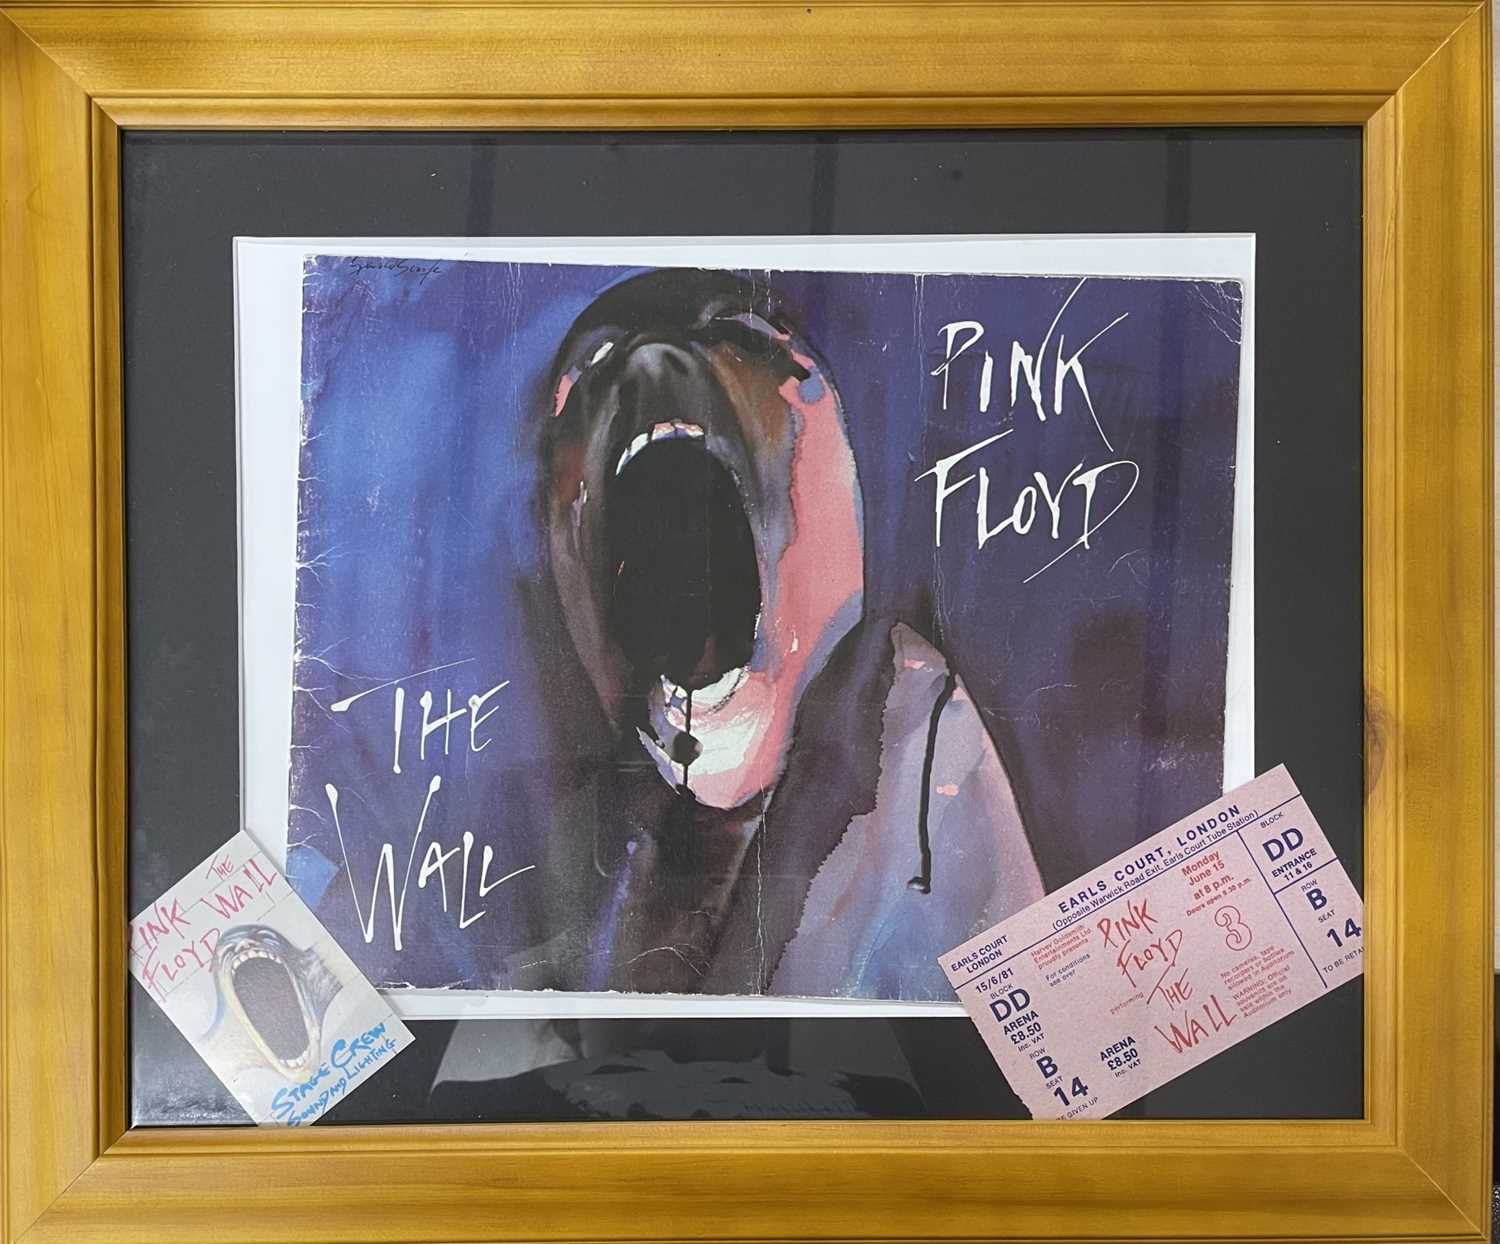 PINK FLOYD: THE WALL: Framed 1971 tour programme with original ticket stub and Stage Crew card.